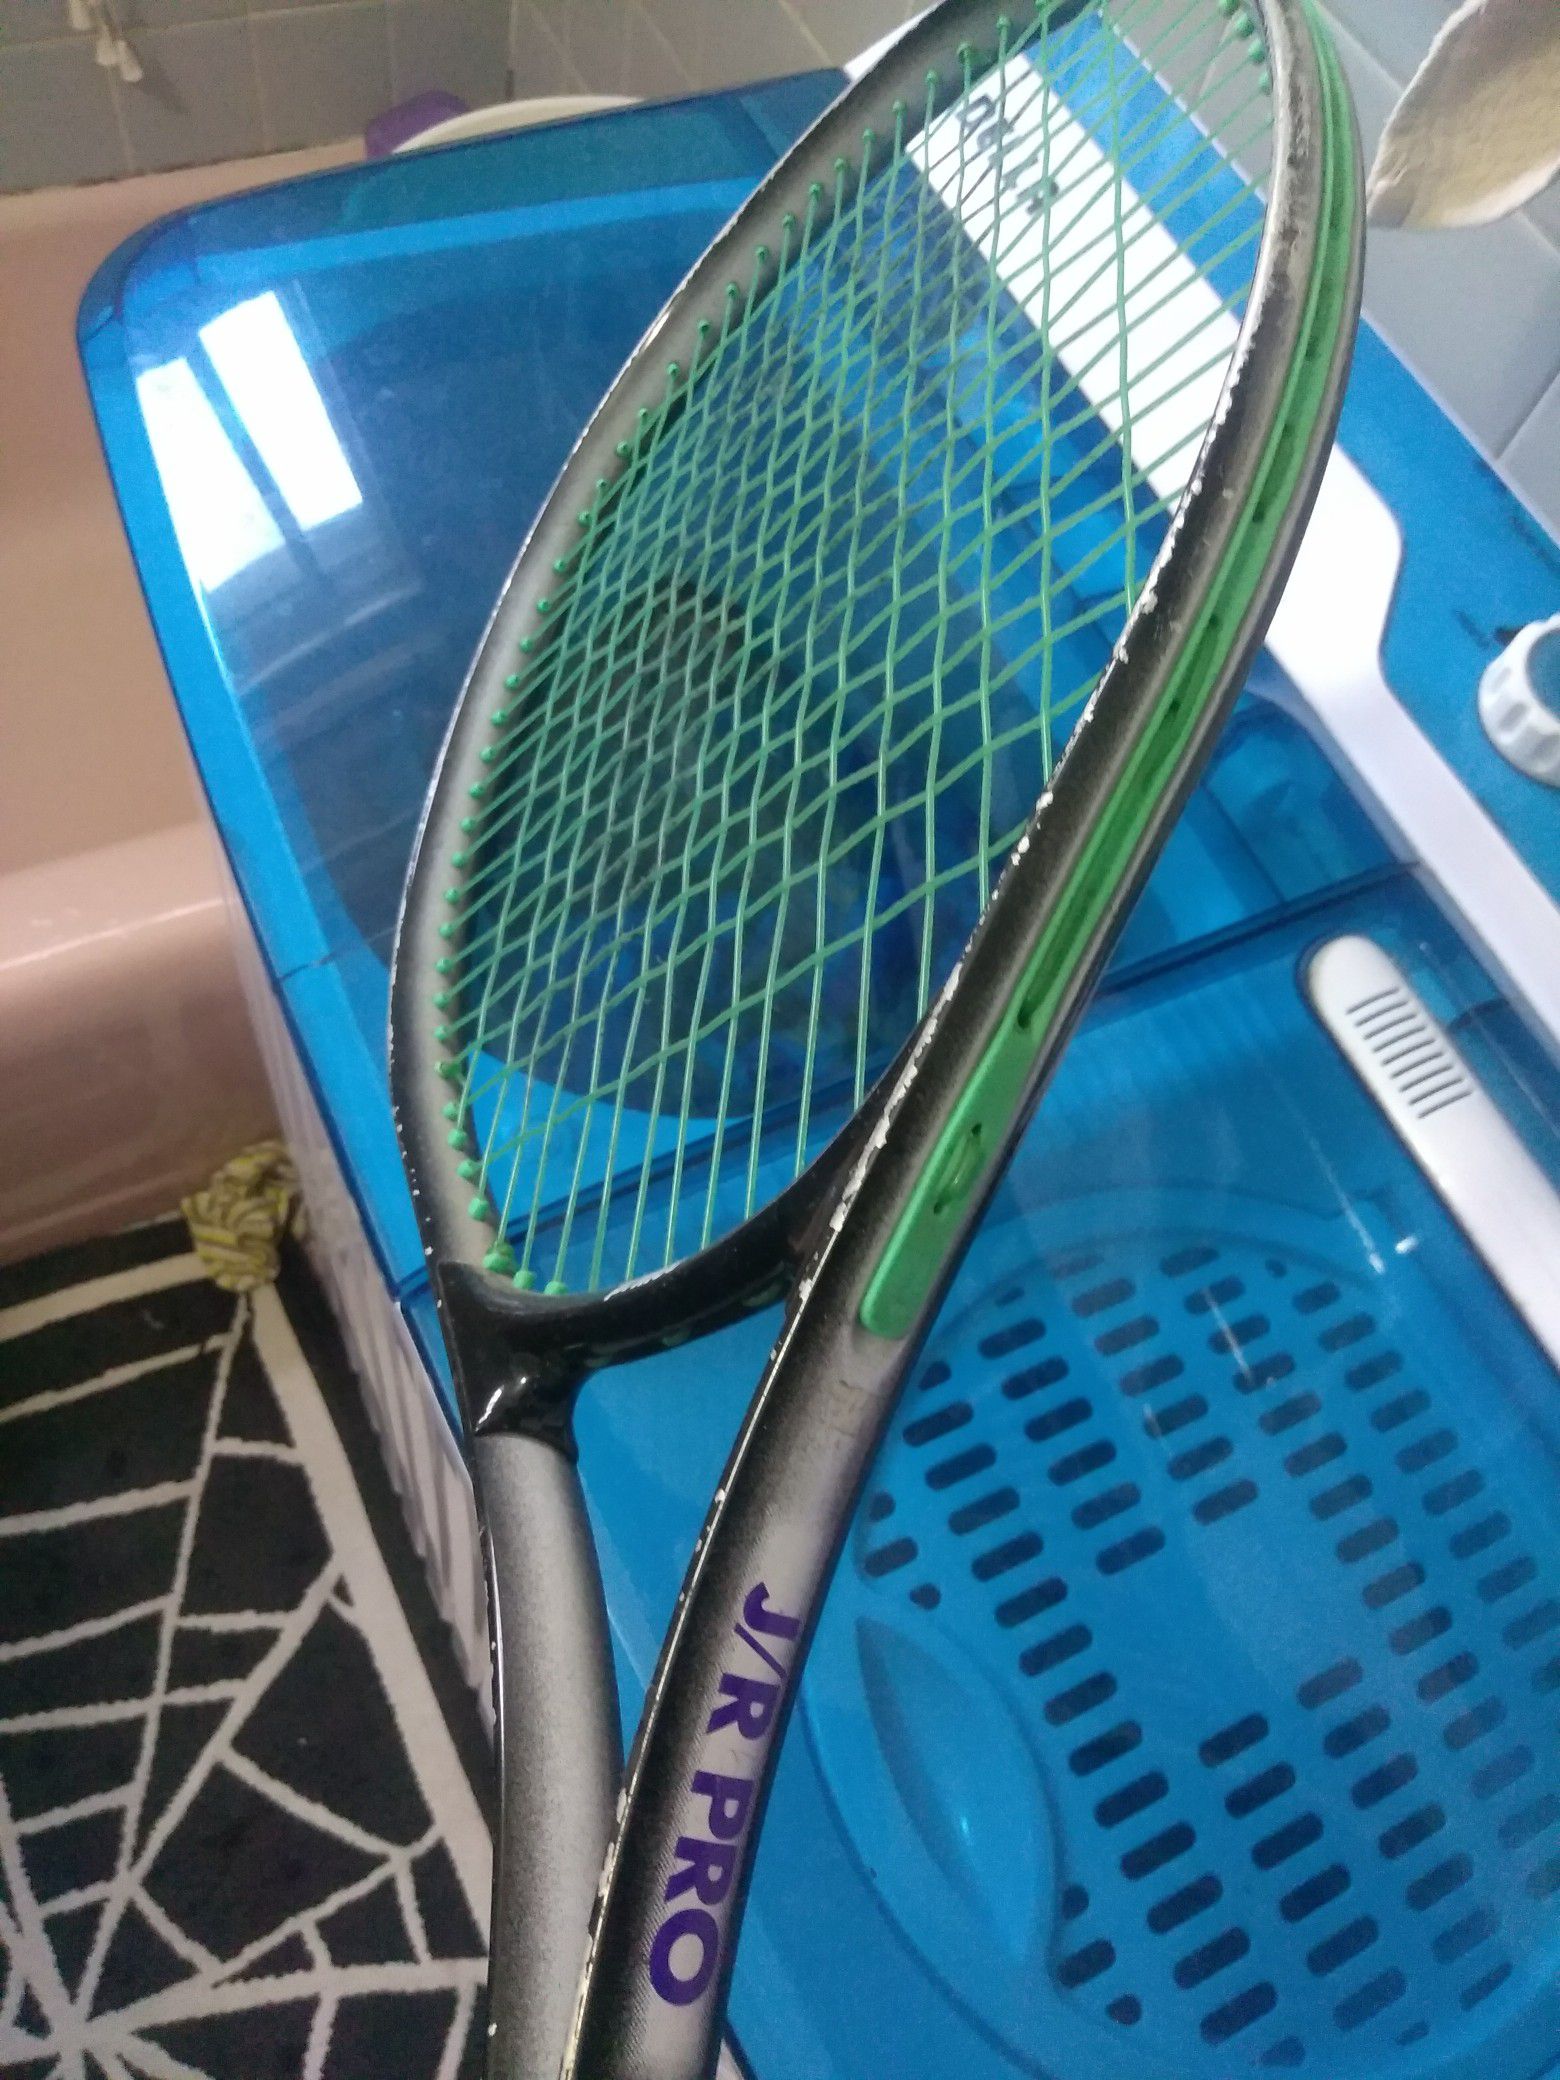 Prince J/R Pro Tennis Racket Strung and Ready